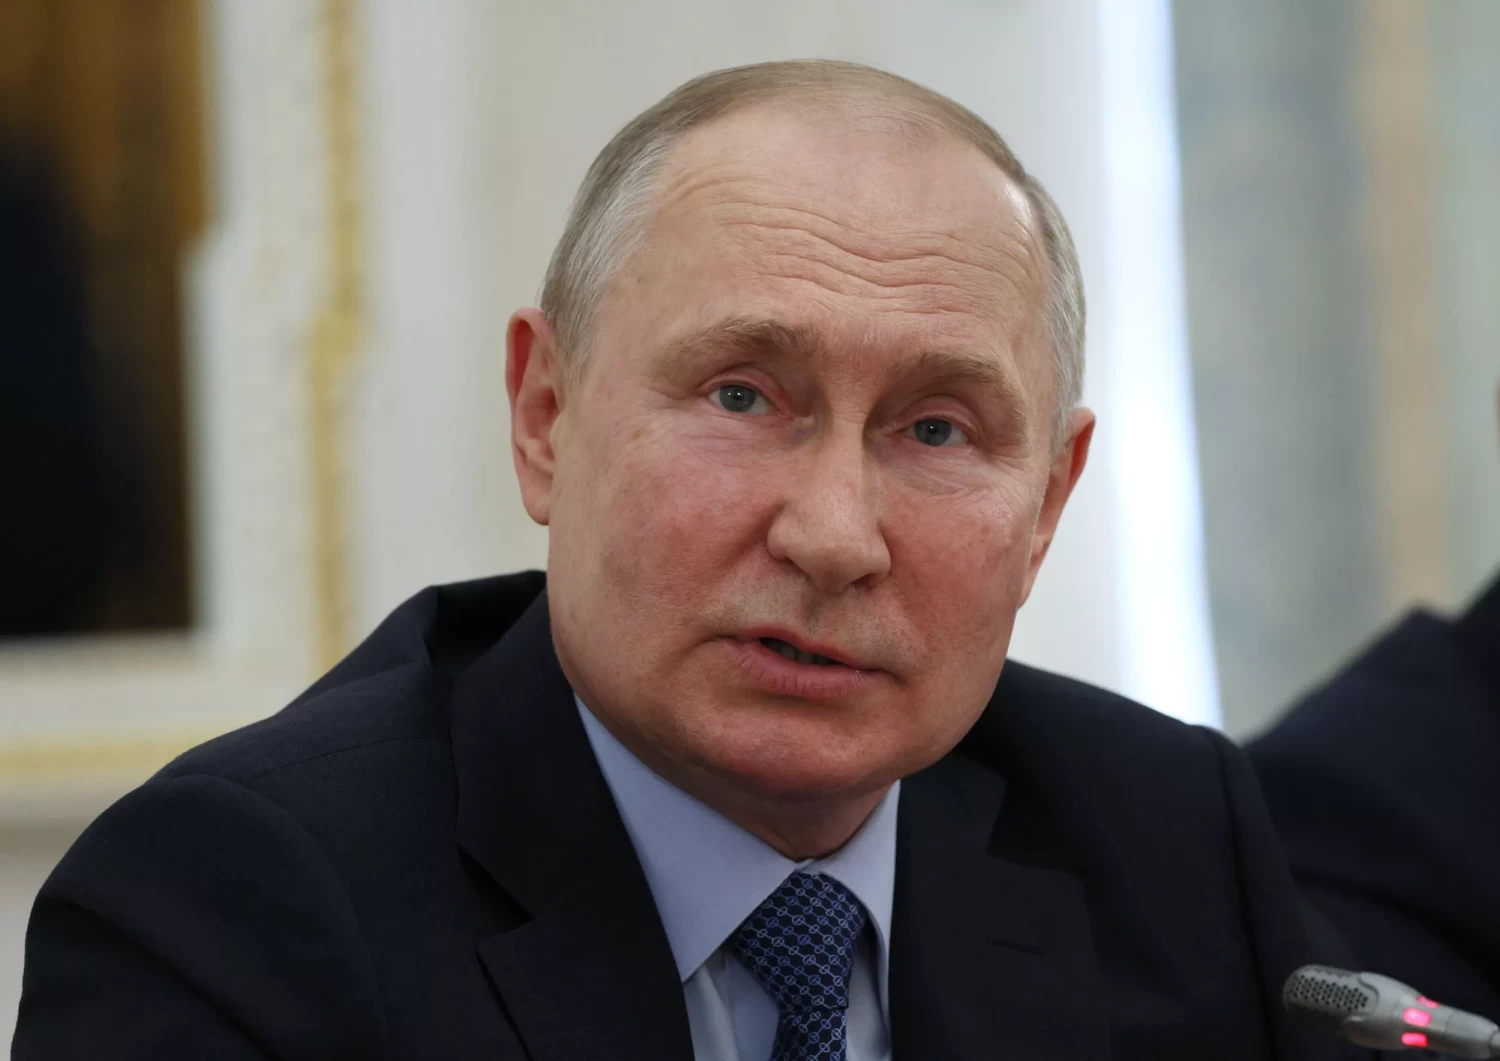 Russian President Vladimir Putin is seen during a meeting in Moscow on Tuesday. A key ally of the Russian president urged for the Kremlin to use nuclear weapons against NATO countries. GAVRIIL GRIGOROV/SPUTNIK/AFP VIA GETTY IMAGES